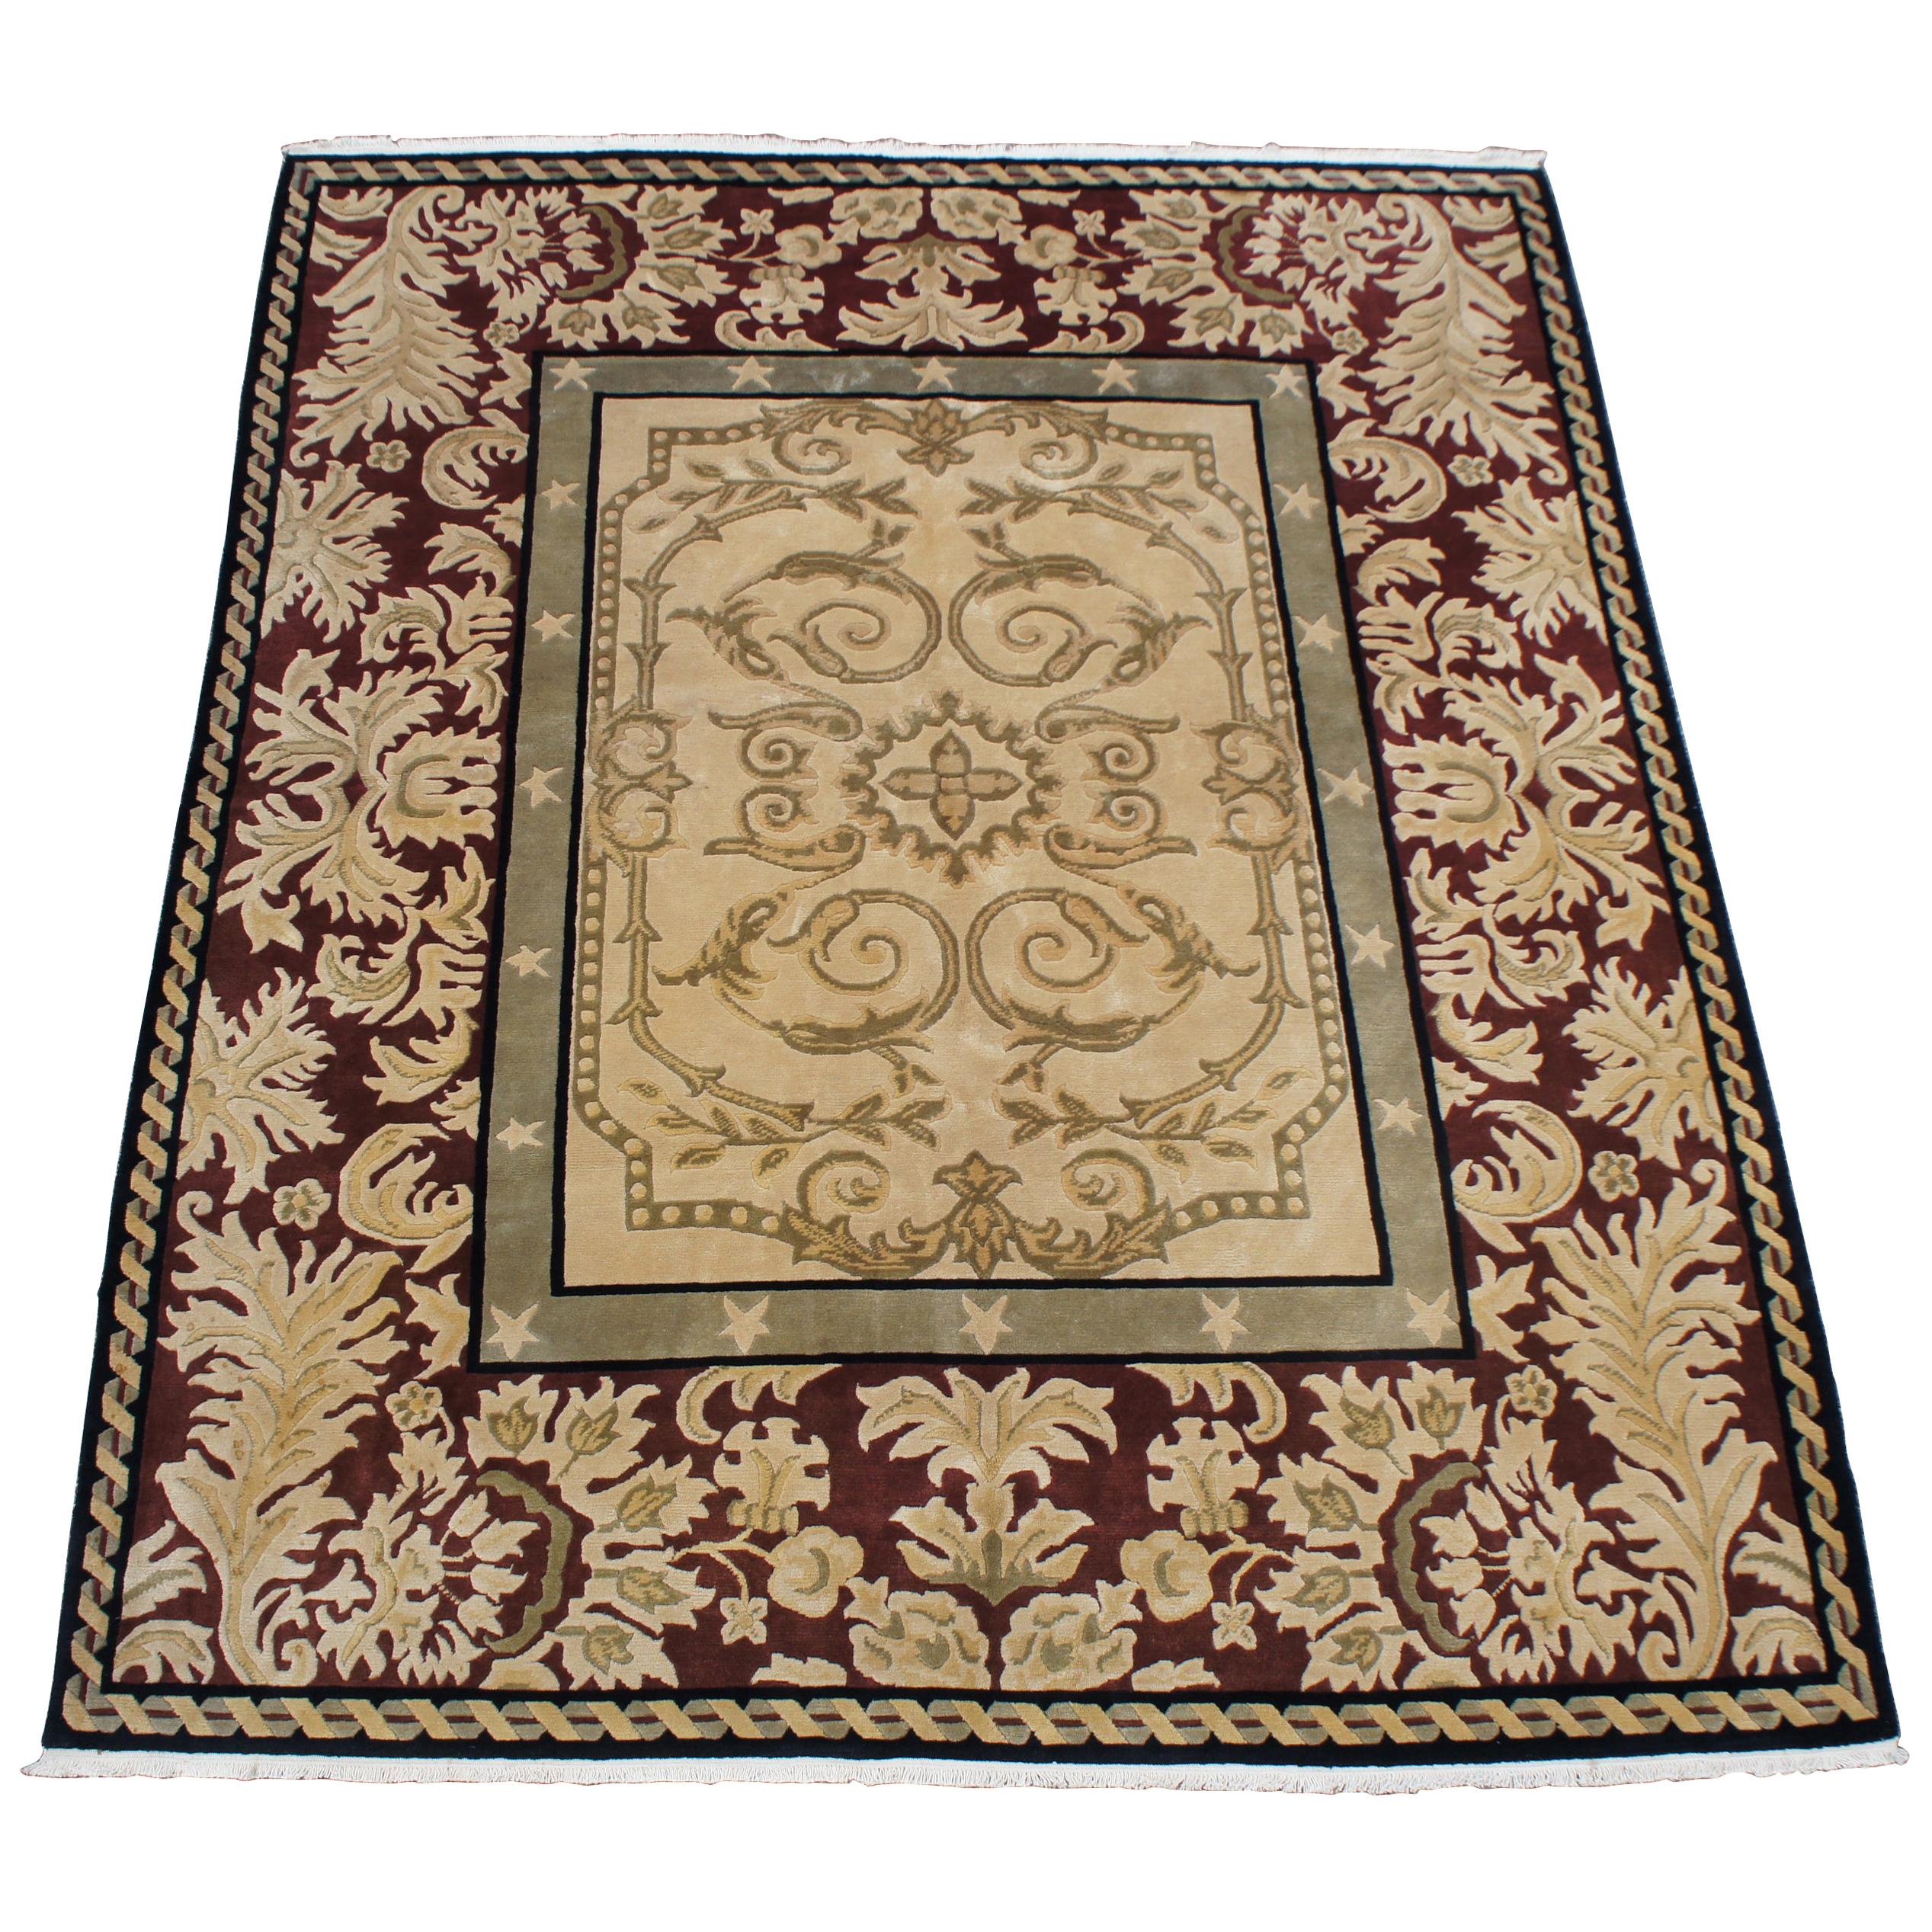 What is a Nepali carpet?